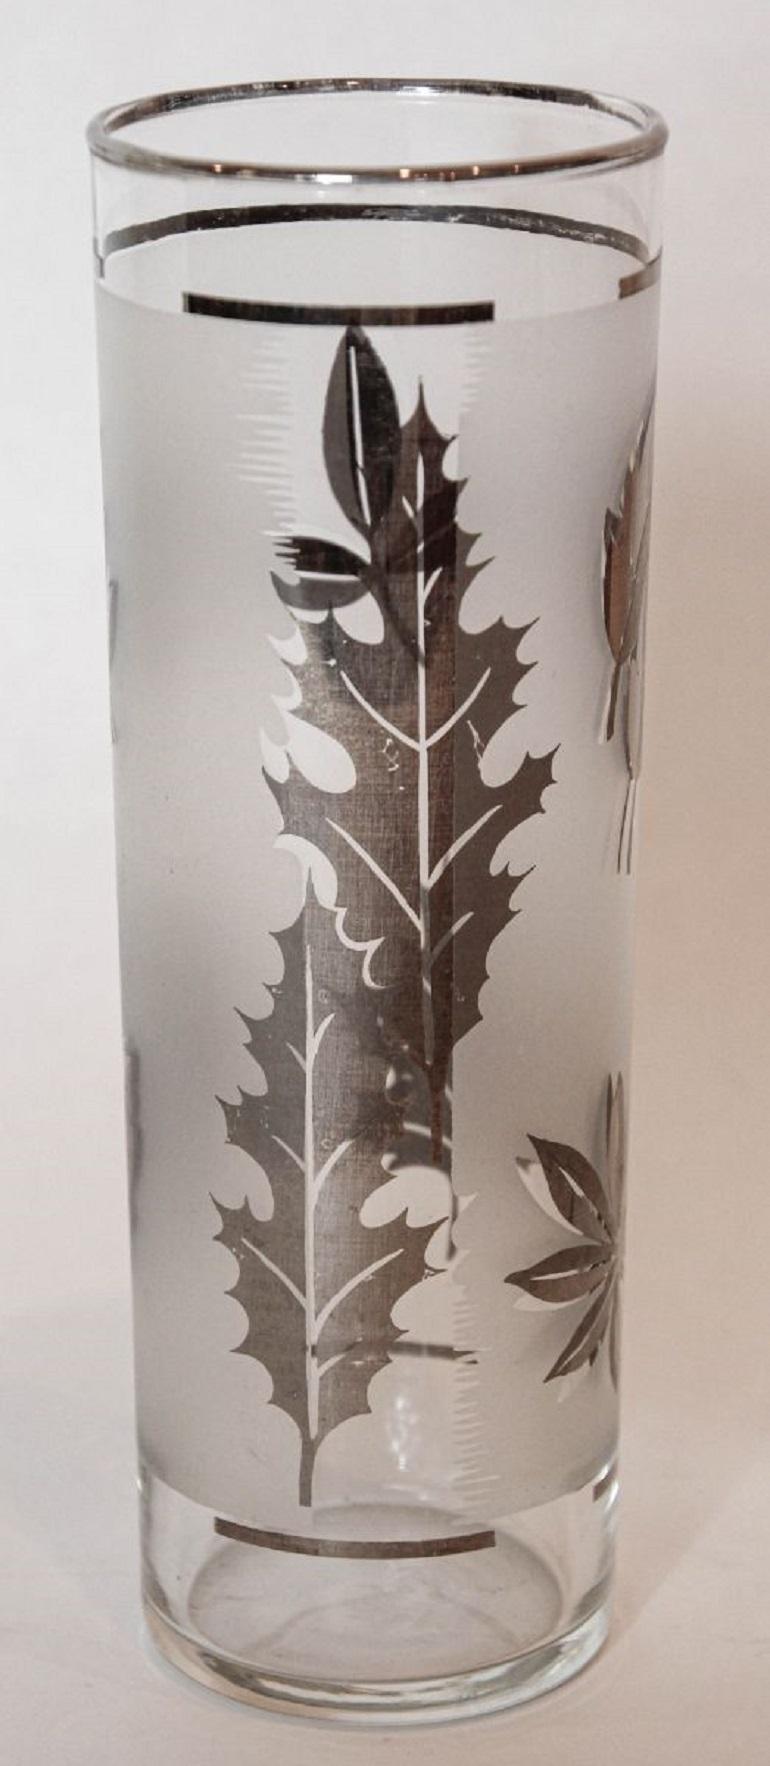 American 1950s Silver Foliage Highball Cocktail Glasses by Libbey Glass Co Set of 8 For Sale